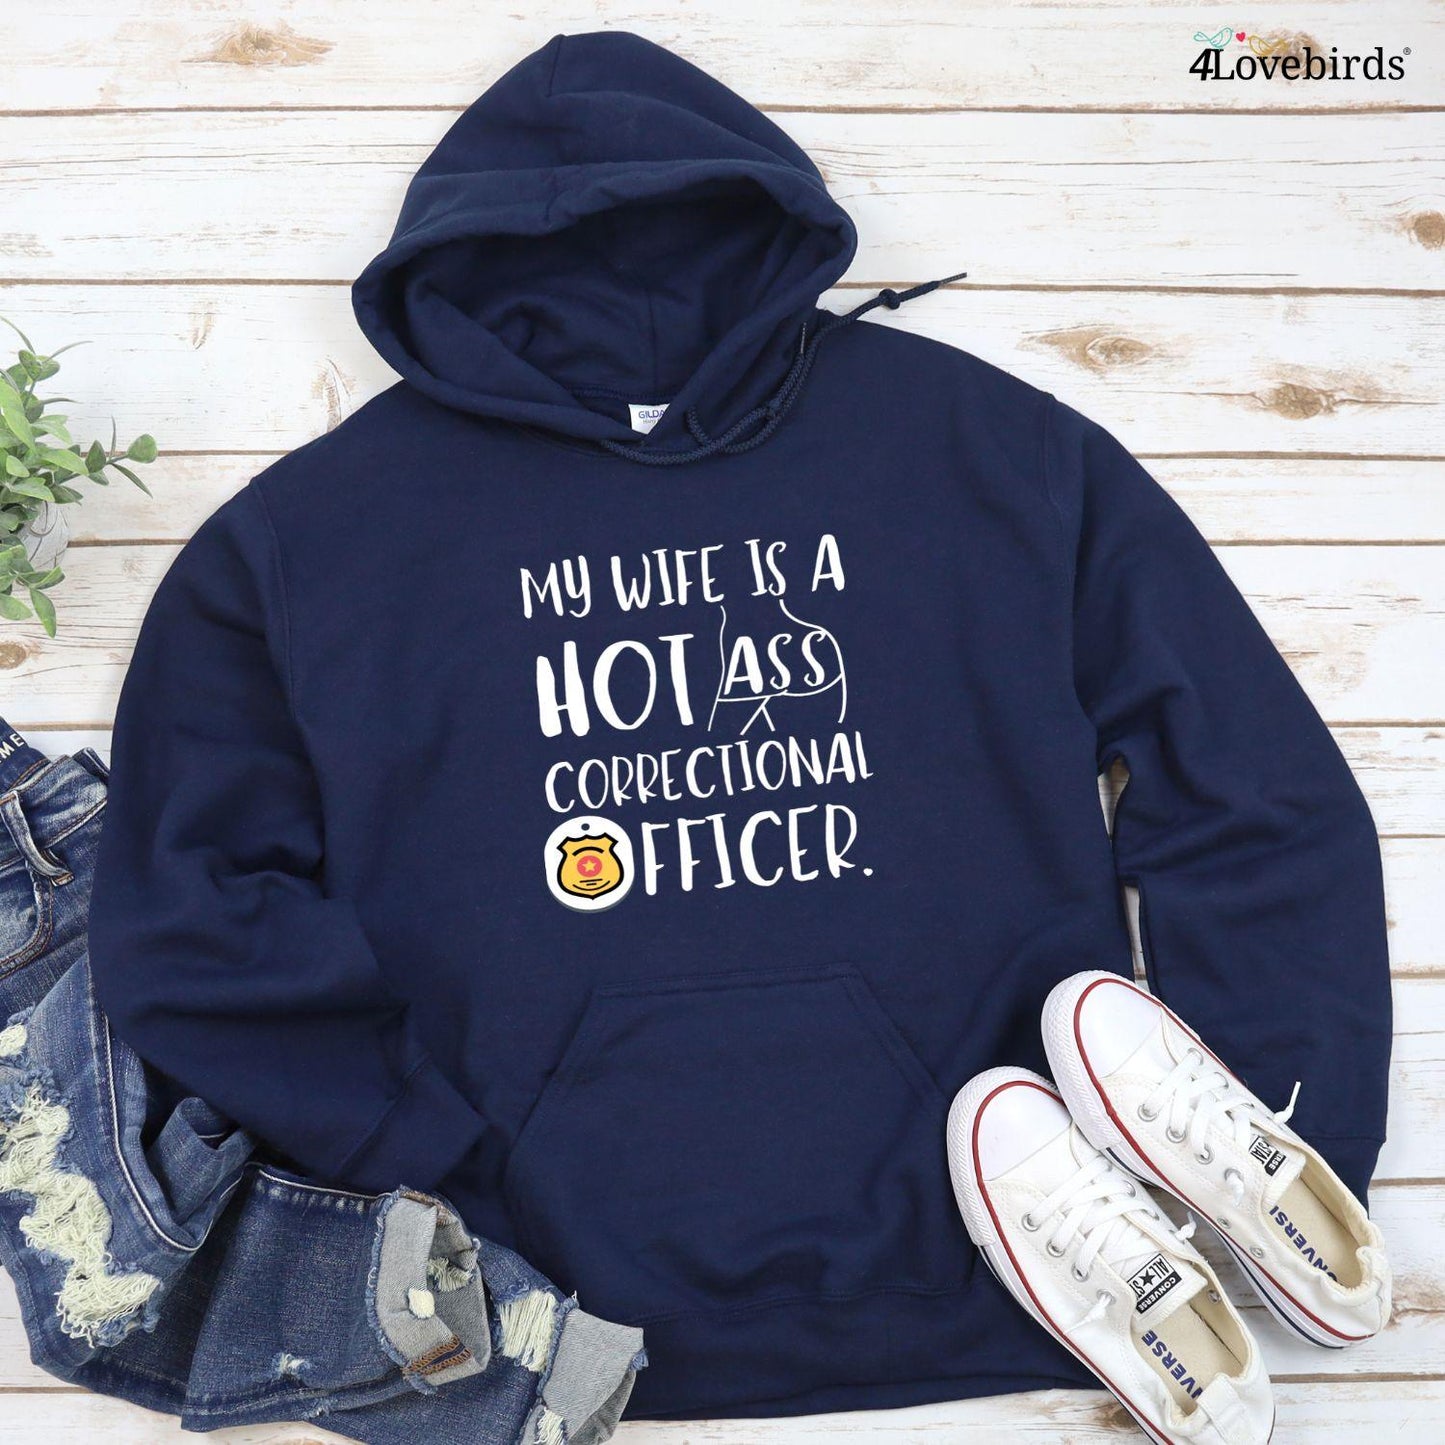 Hot Ass Correctional Officer T-Shirts | Police Wife Gifts | Valentine's Day Outfits - 4Lovebirds